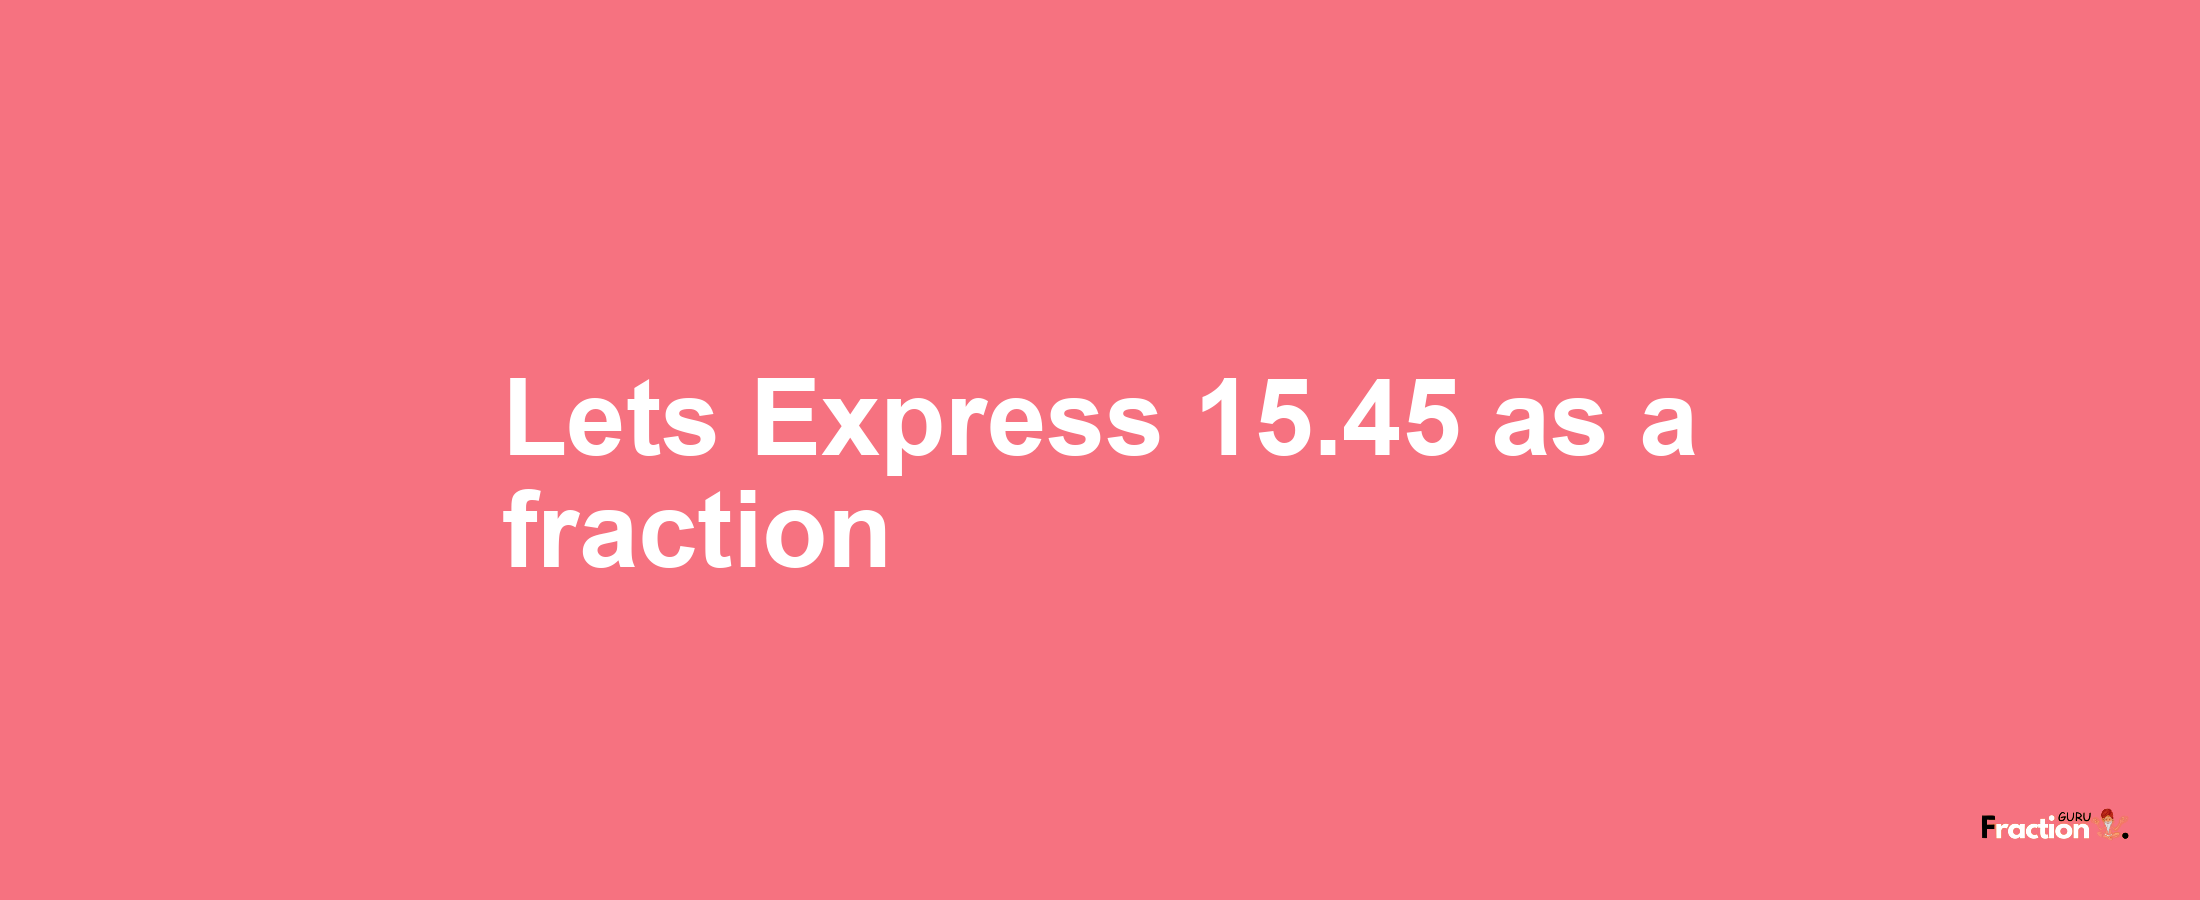 Lets Express 15.45 as afraction